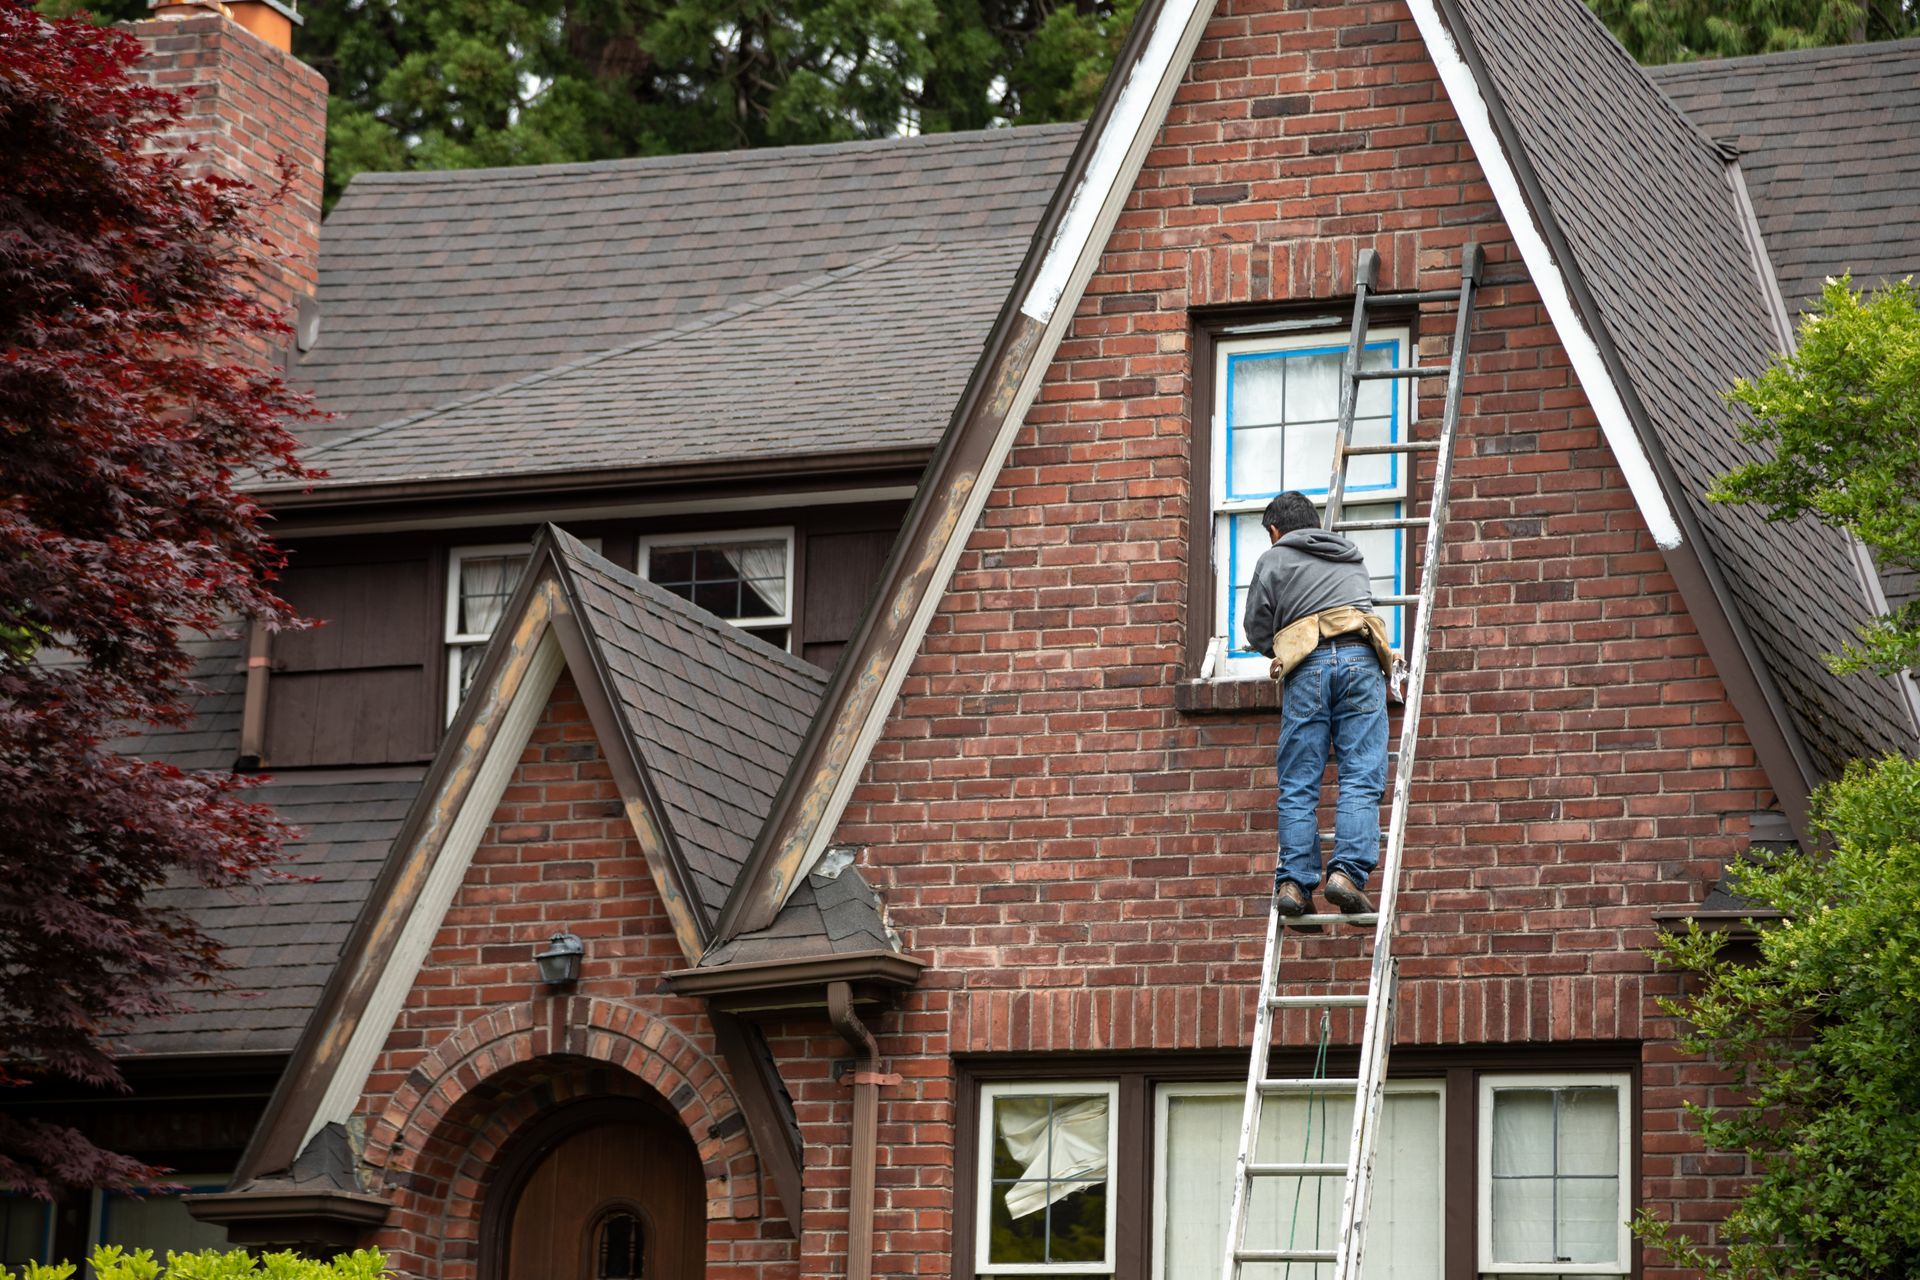 A man on a ladder is performing maintenance on historic windows